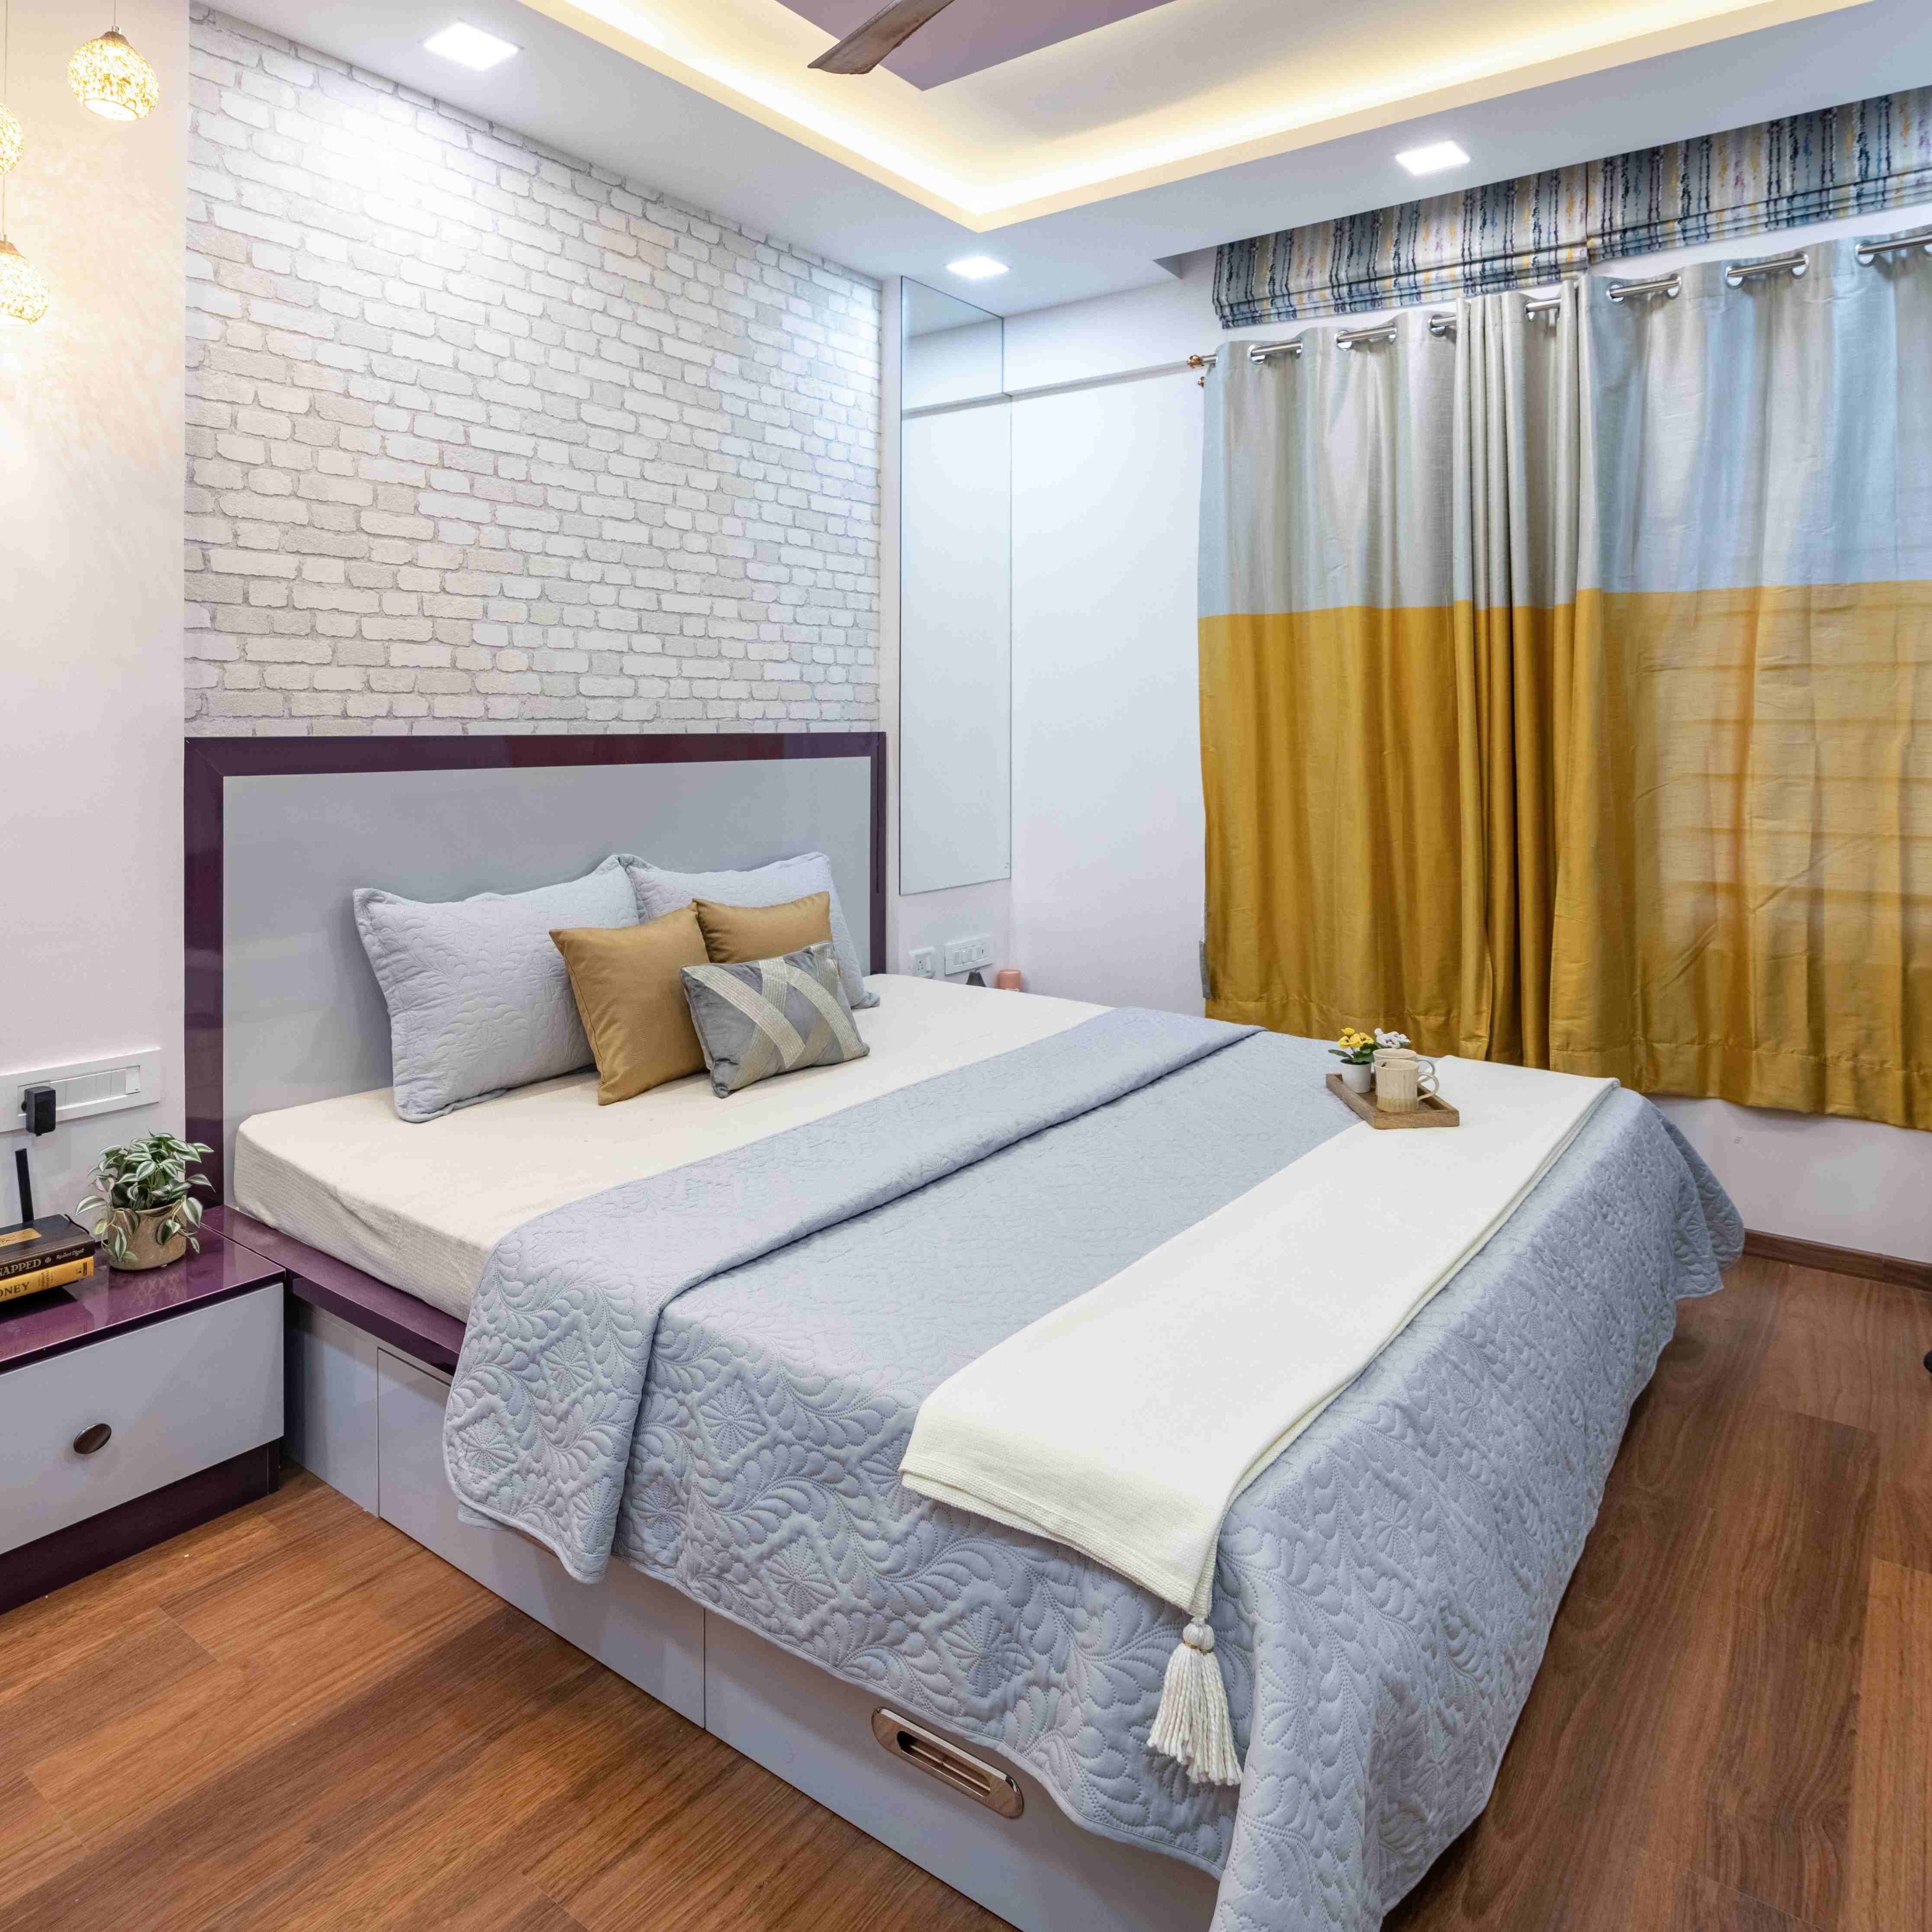 Modern Bedroom Design With A Queen Size Bed And White And Purple Side Tables